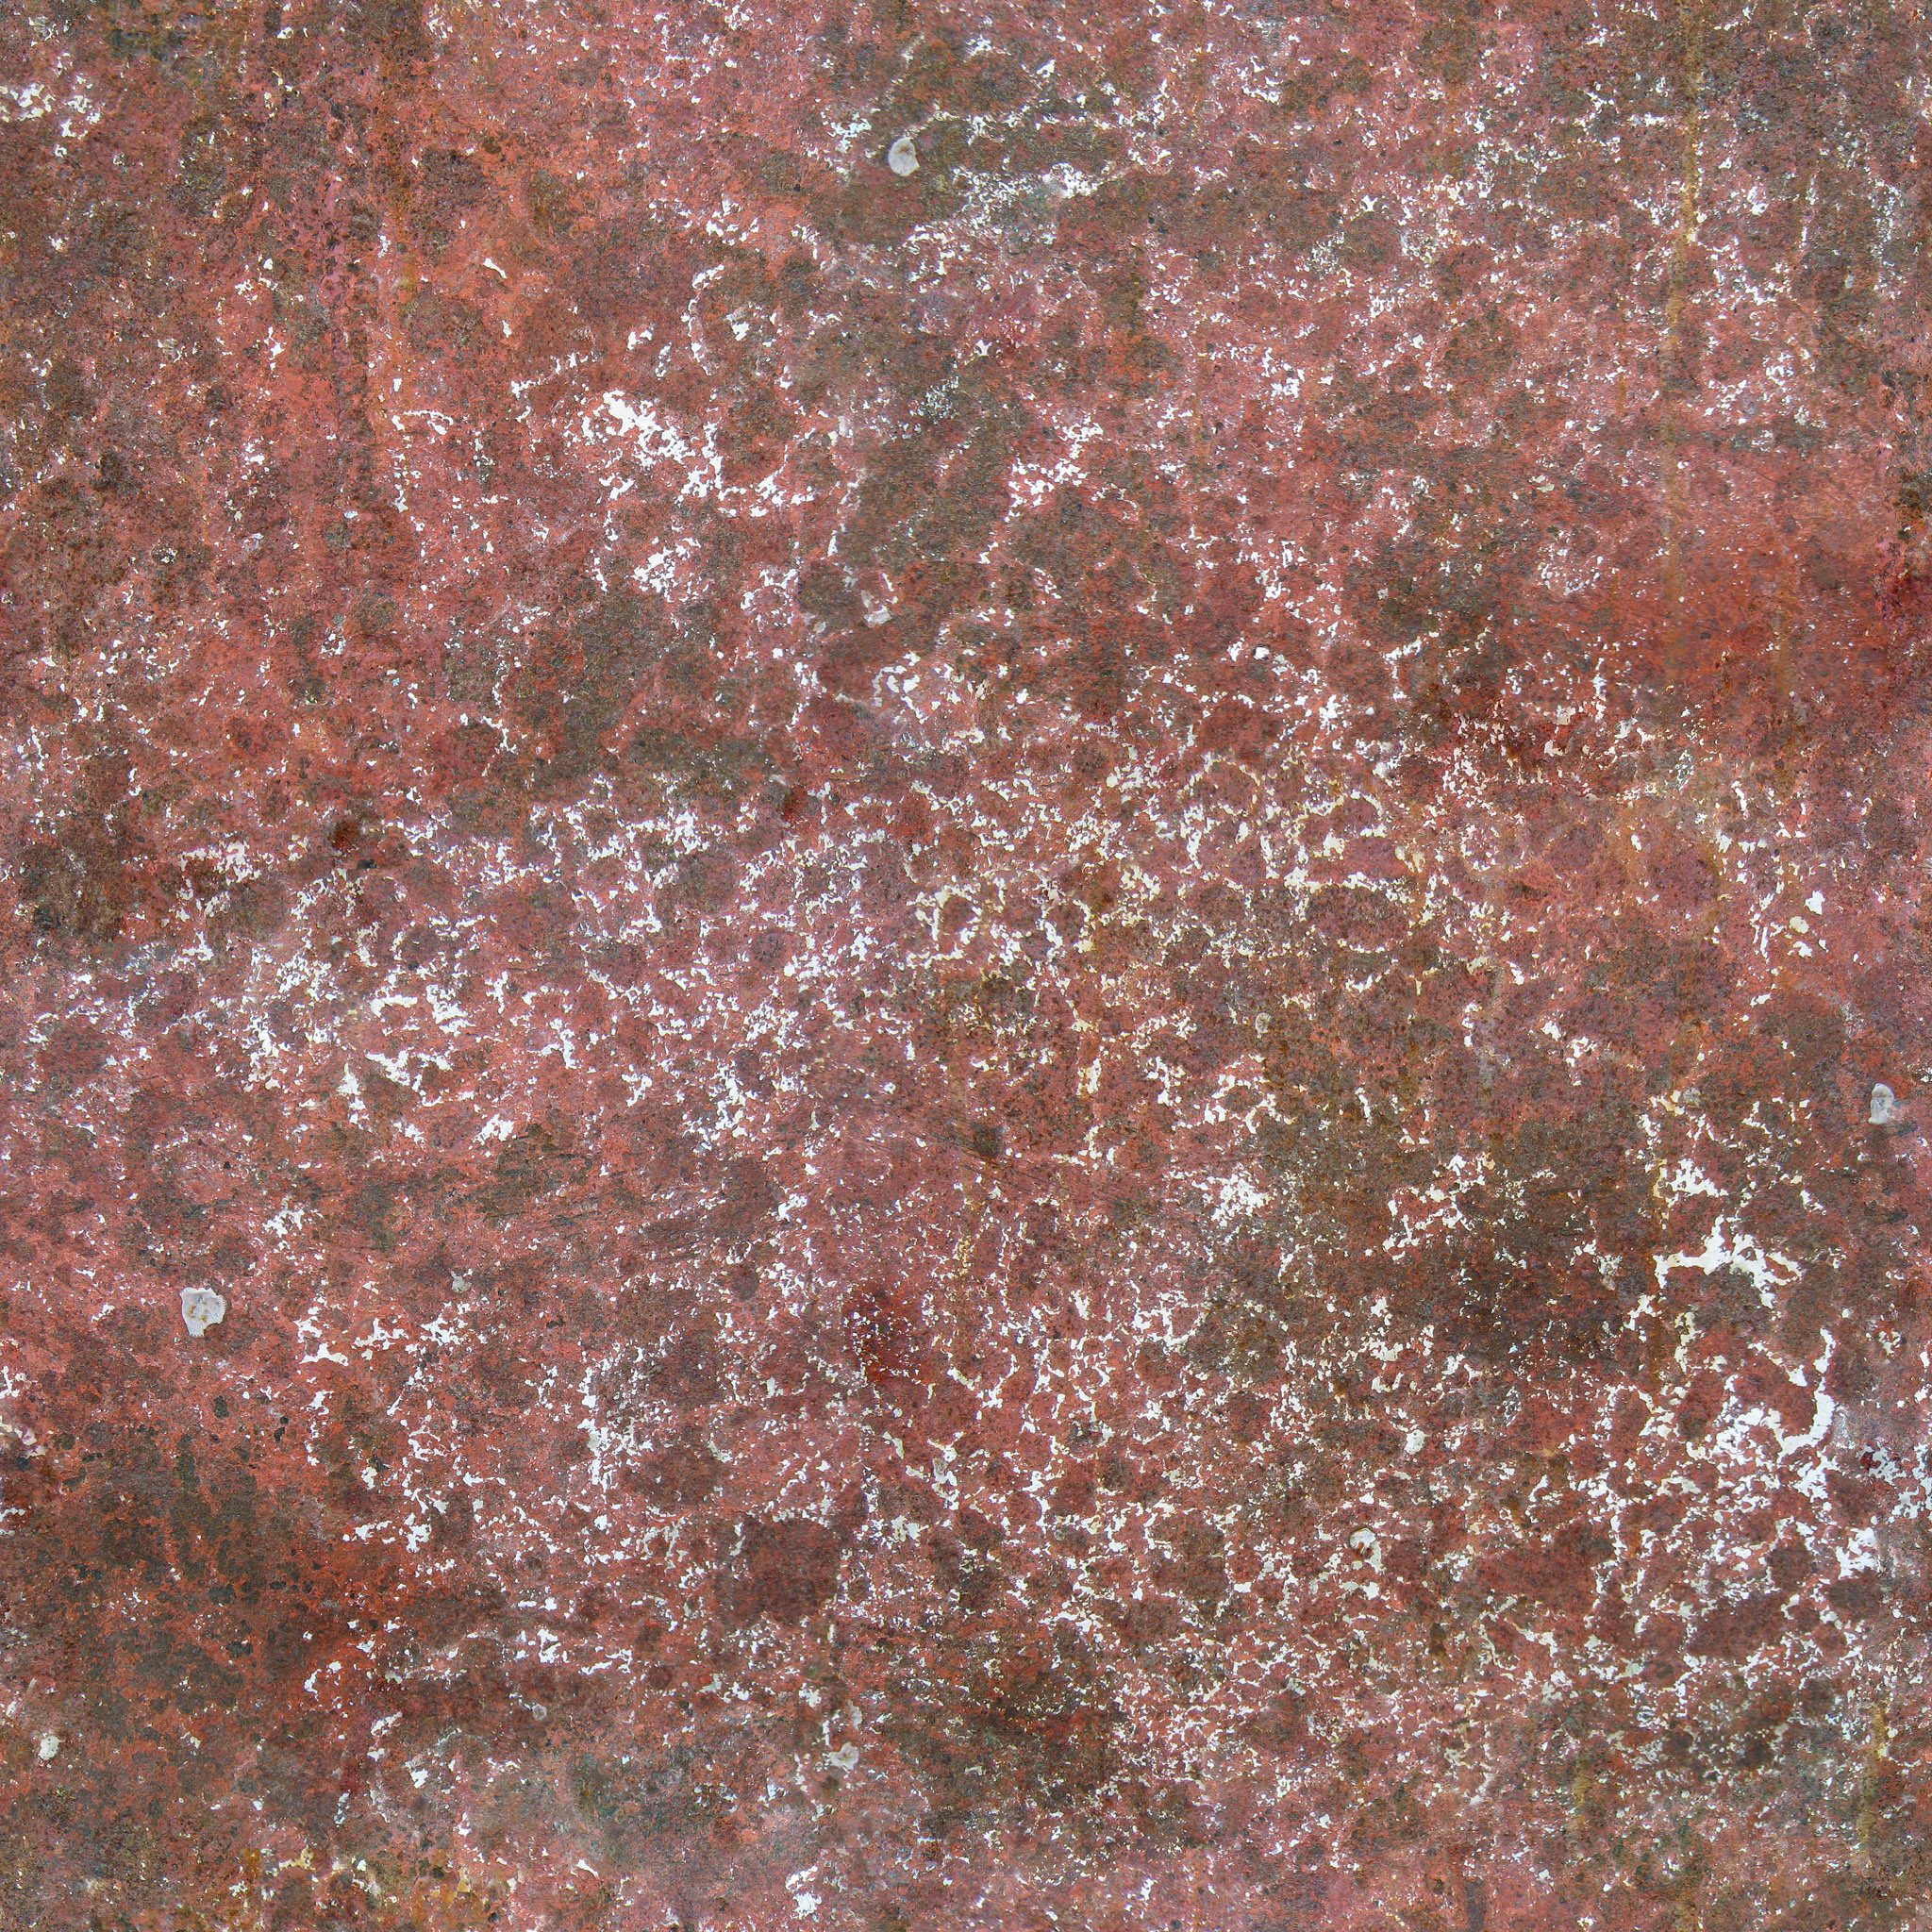 Metal Rusty and Patterned Seamless and Tileable High Res Textures